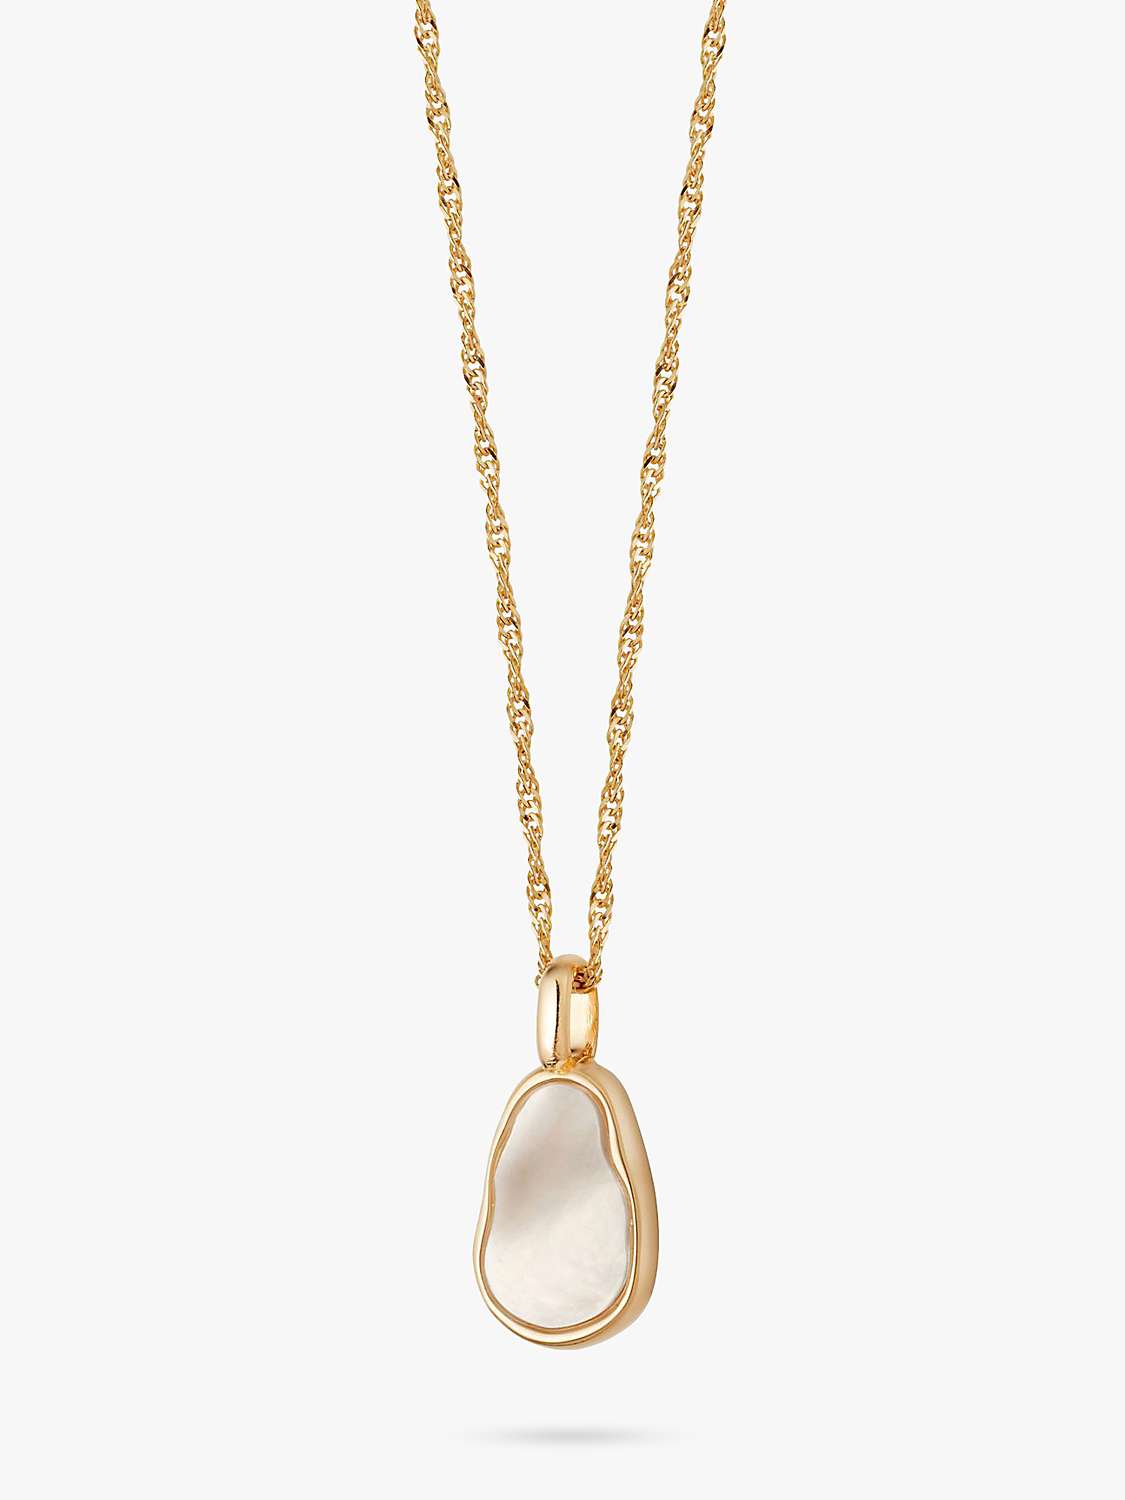 Buy Daisy London Isla Mother of Pearl Pendant Necklace, Gold Online at johnlewis.com